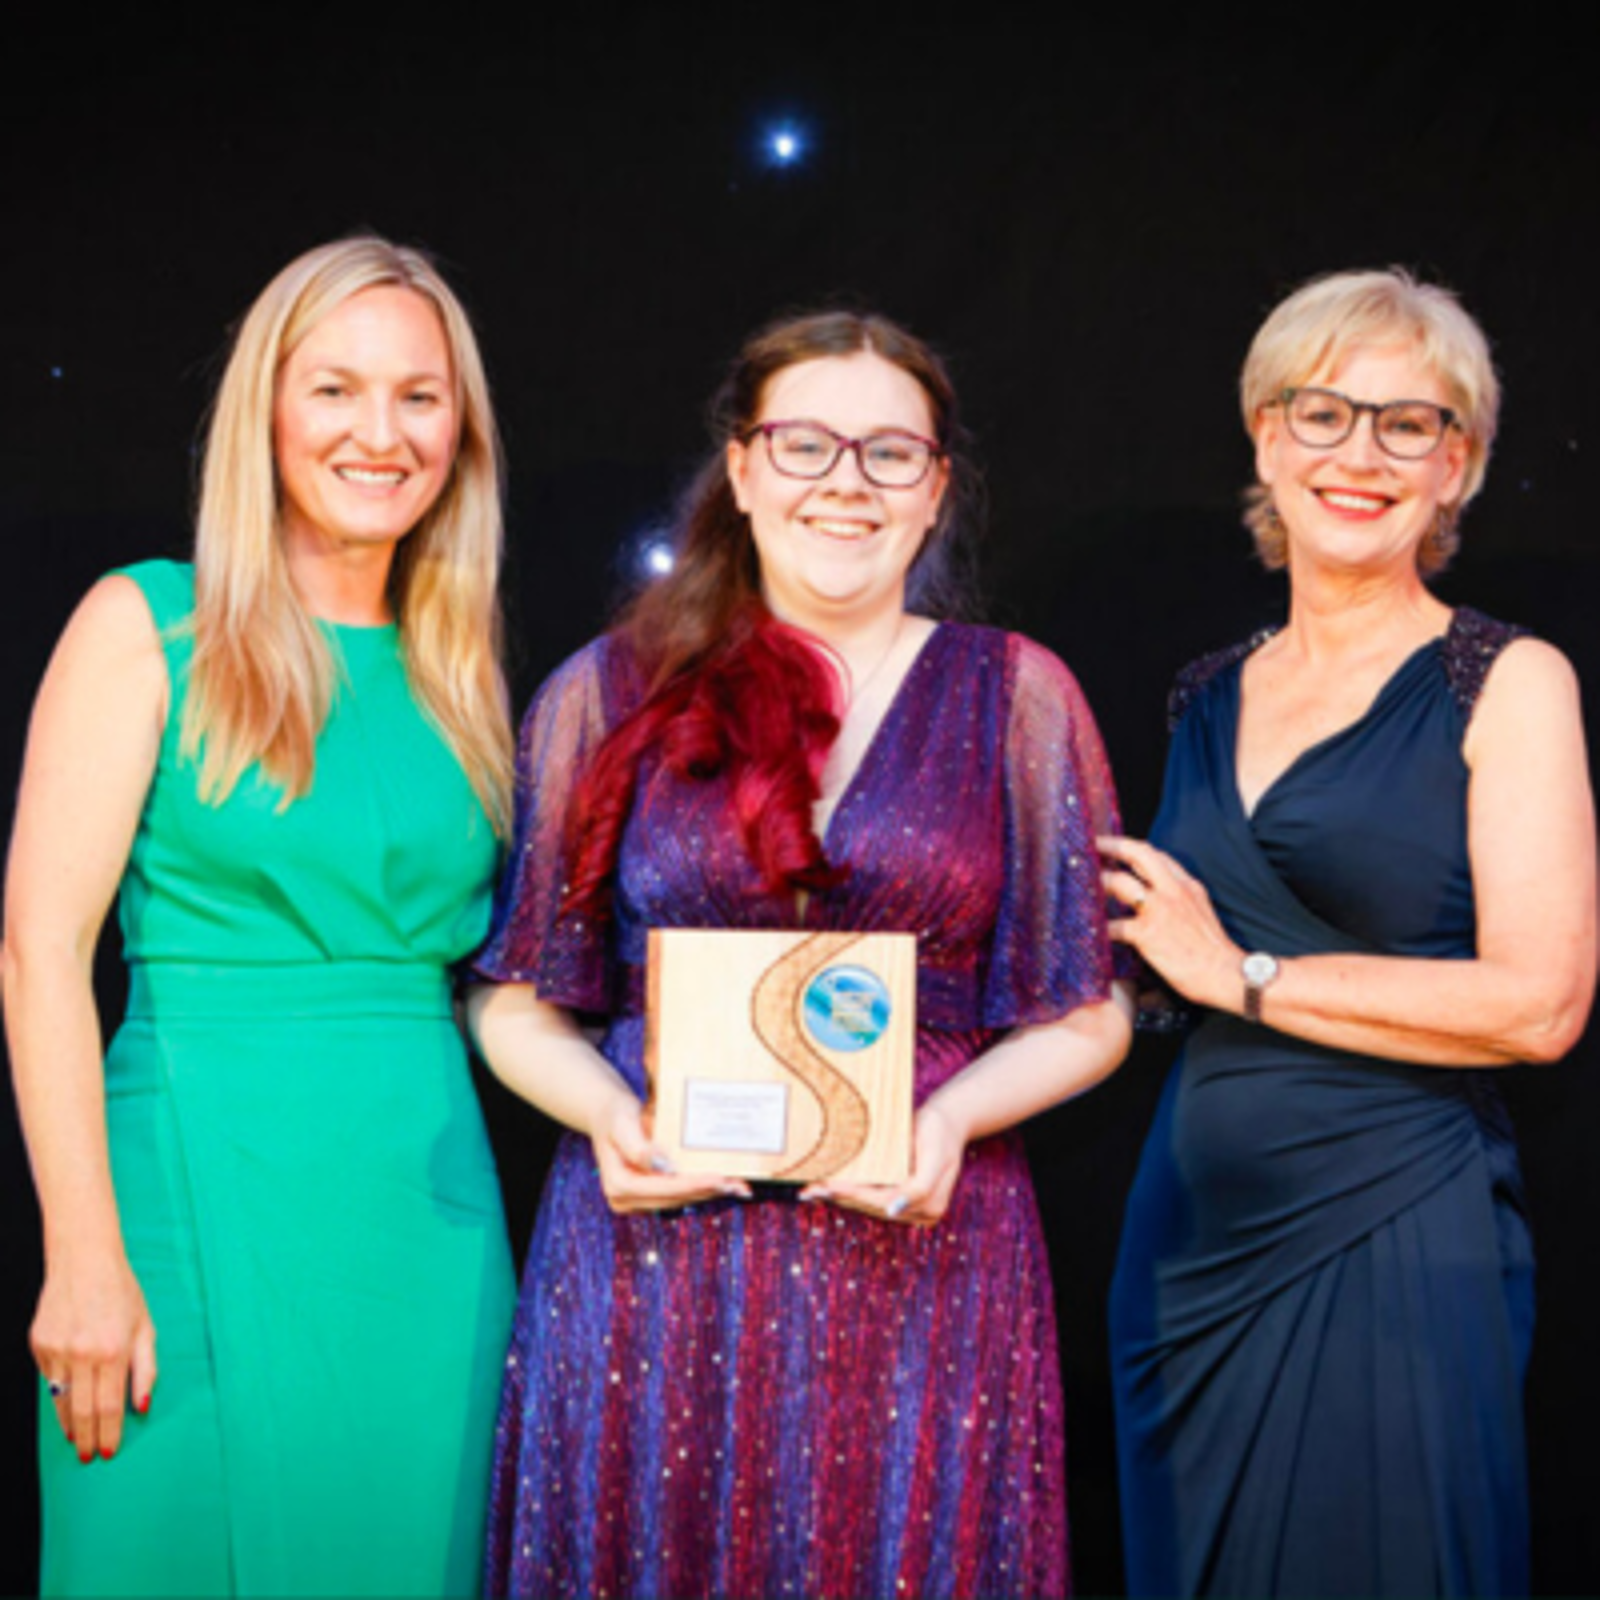 Kaydi with awards hosts, holding her Scottish Charity of the Year award